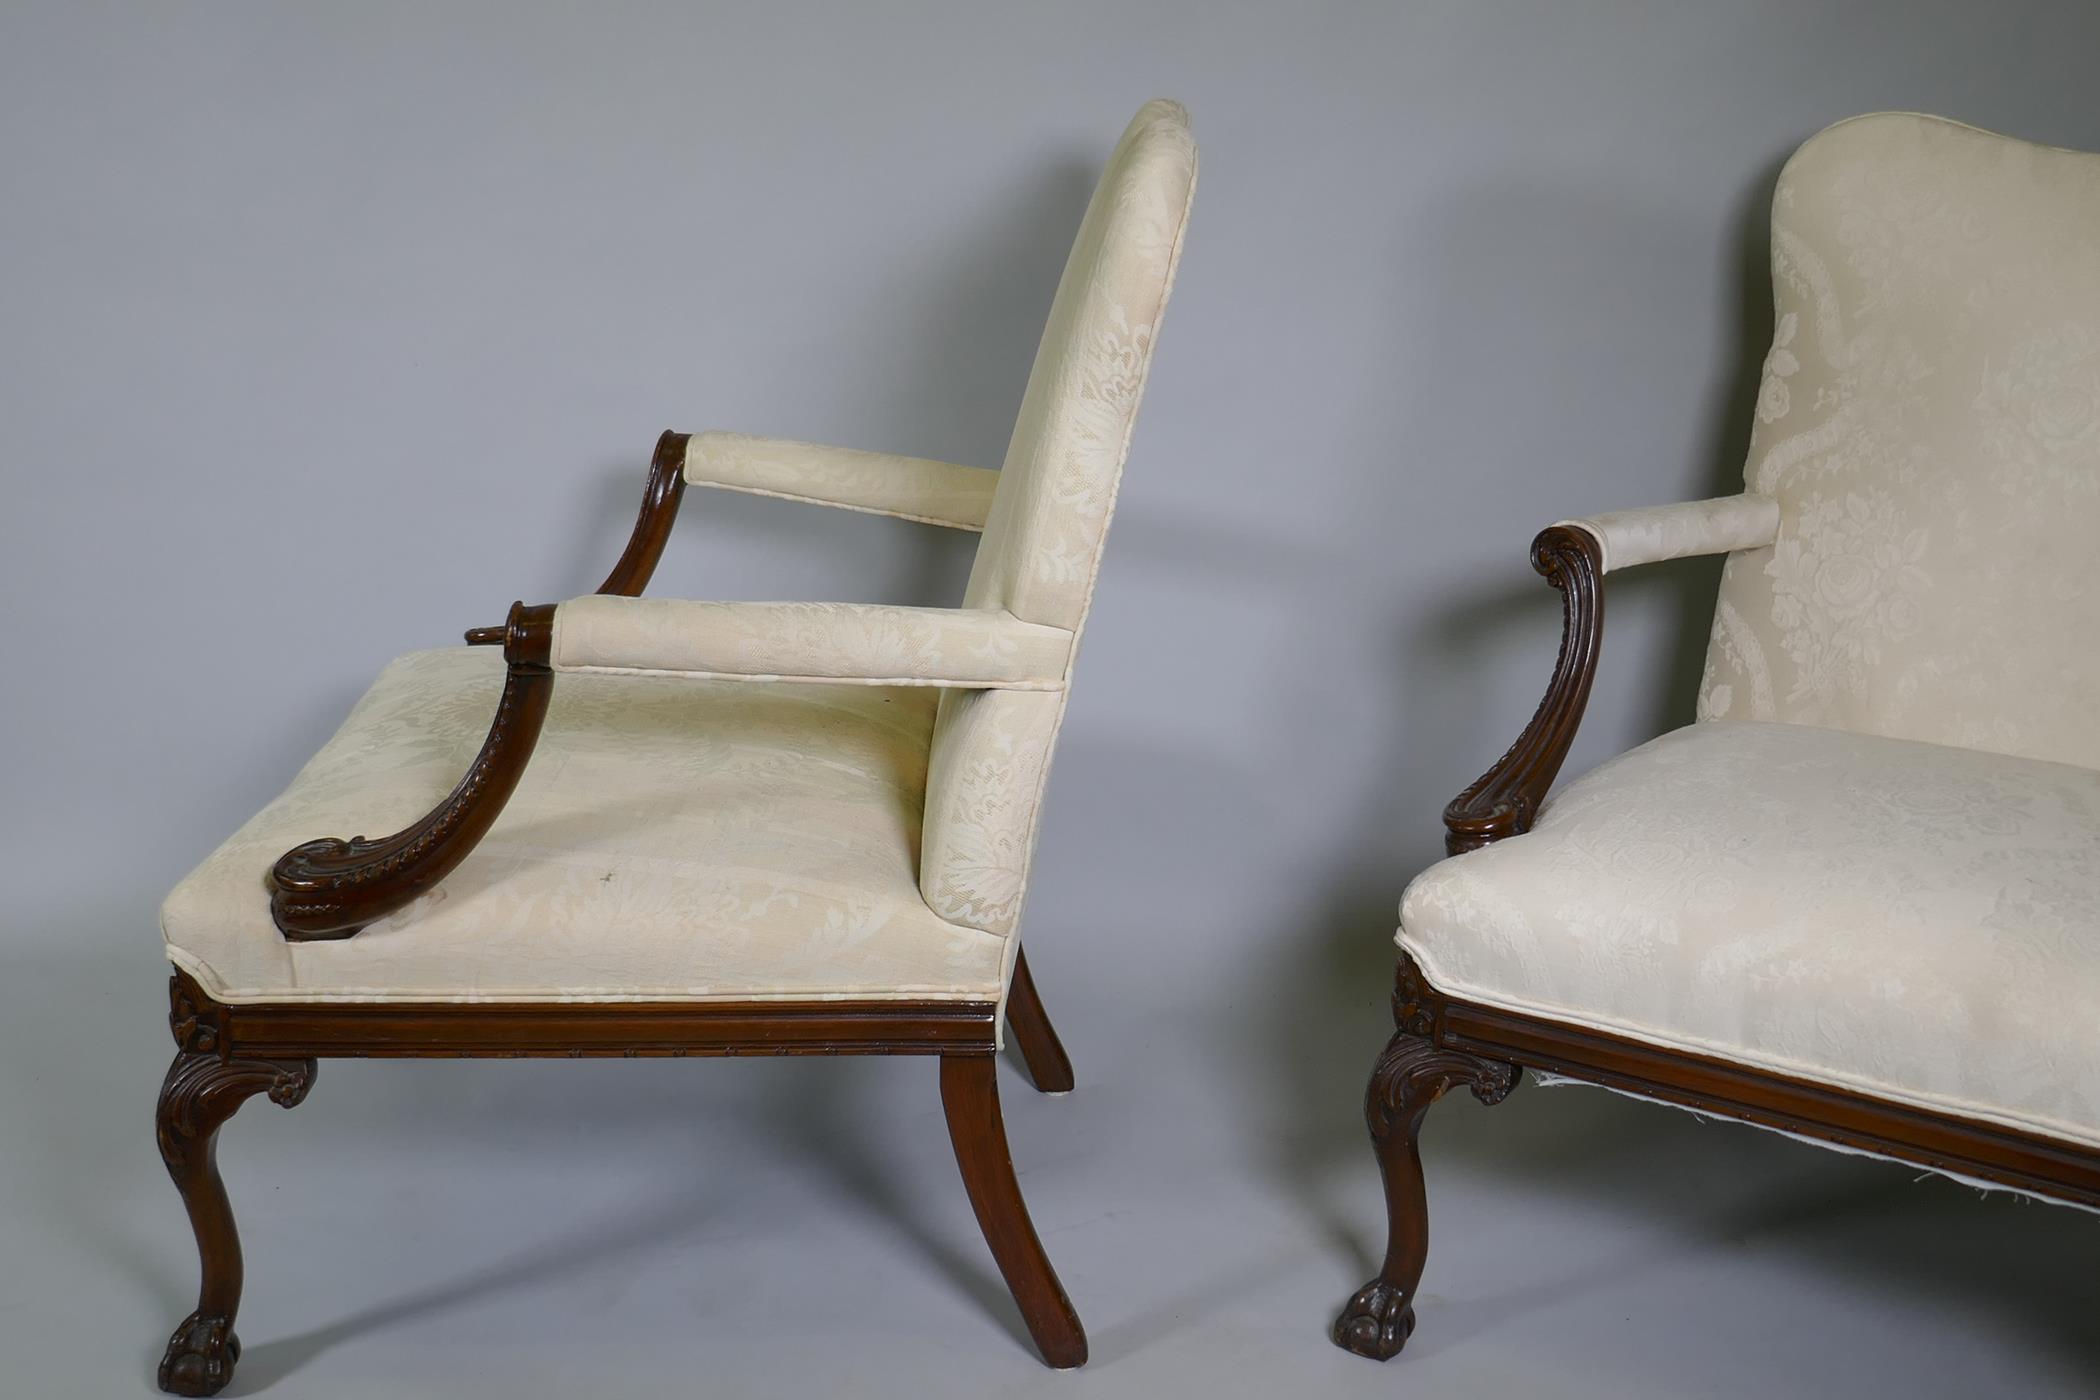 A pr of C18th style Gainsborough chairs with carved decoration and hump backs, raised on cabriole - Image 2 of 5